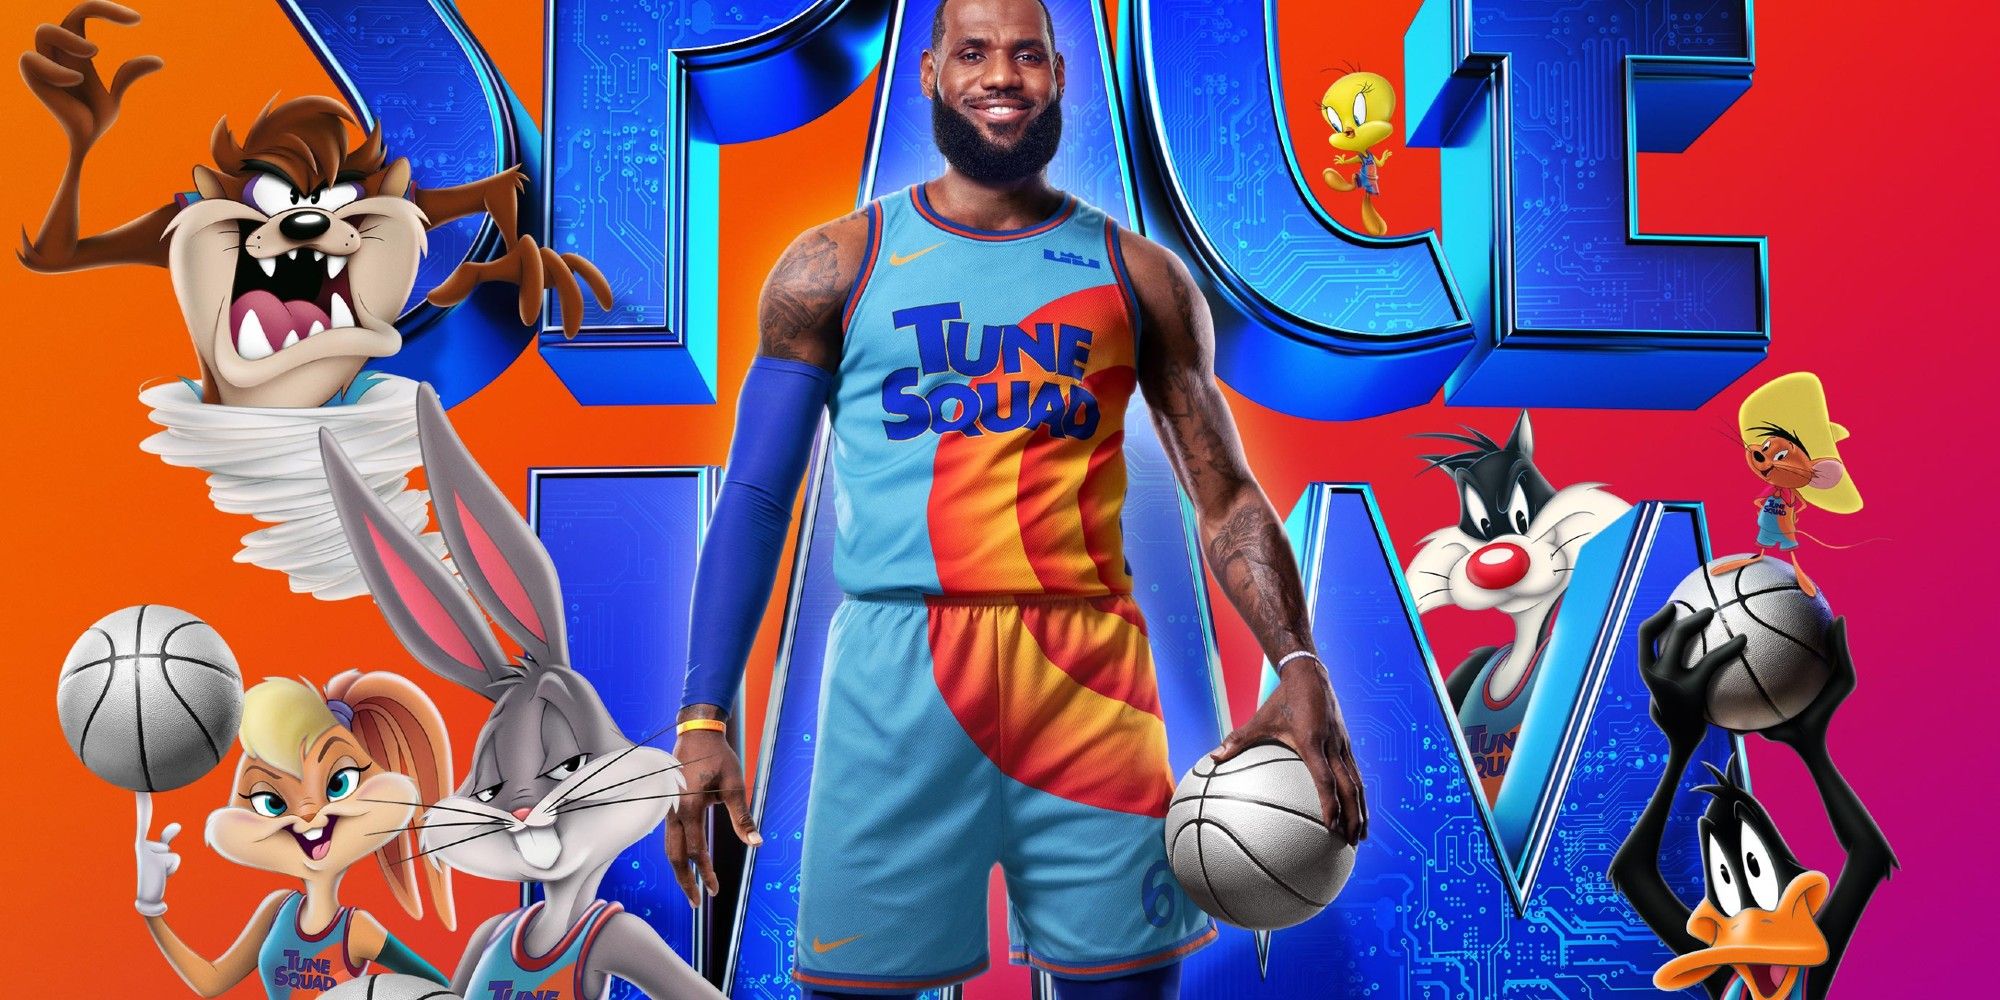 https://www.showbiz411.com/wp-content/uploads/2021/07/Lebron-James-and-the-Tune-Squad-on-Space-Jam-2-Poster-CROPPED.jpg